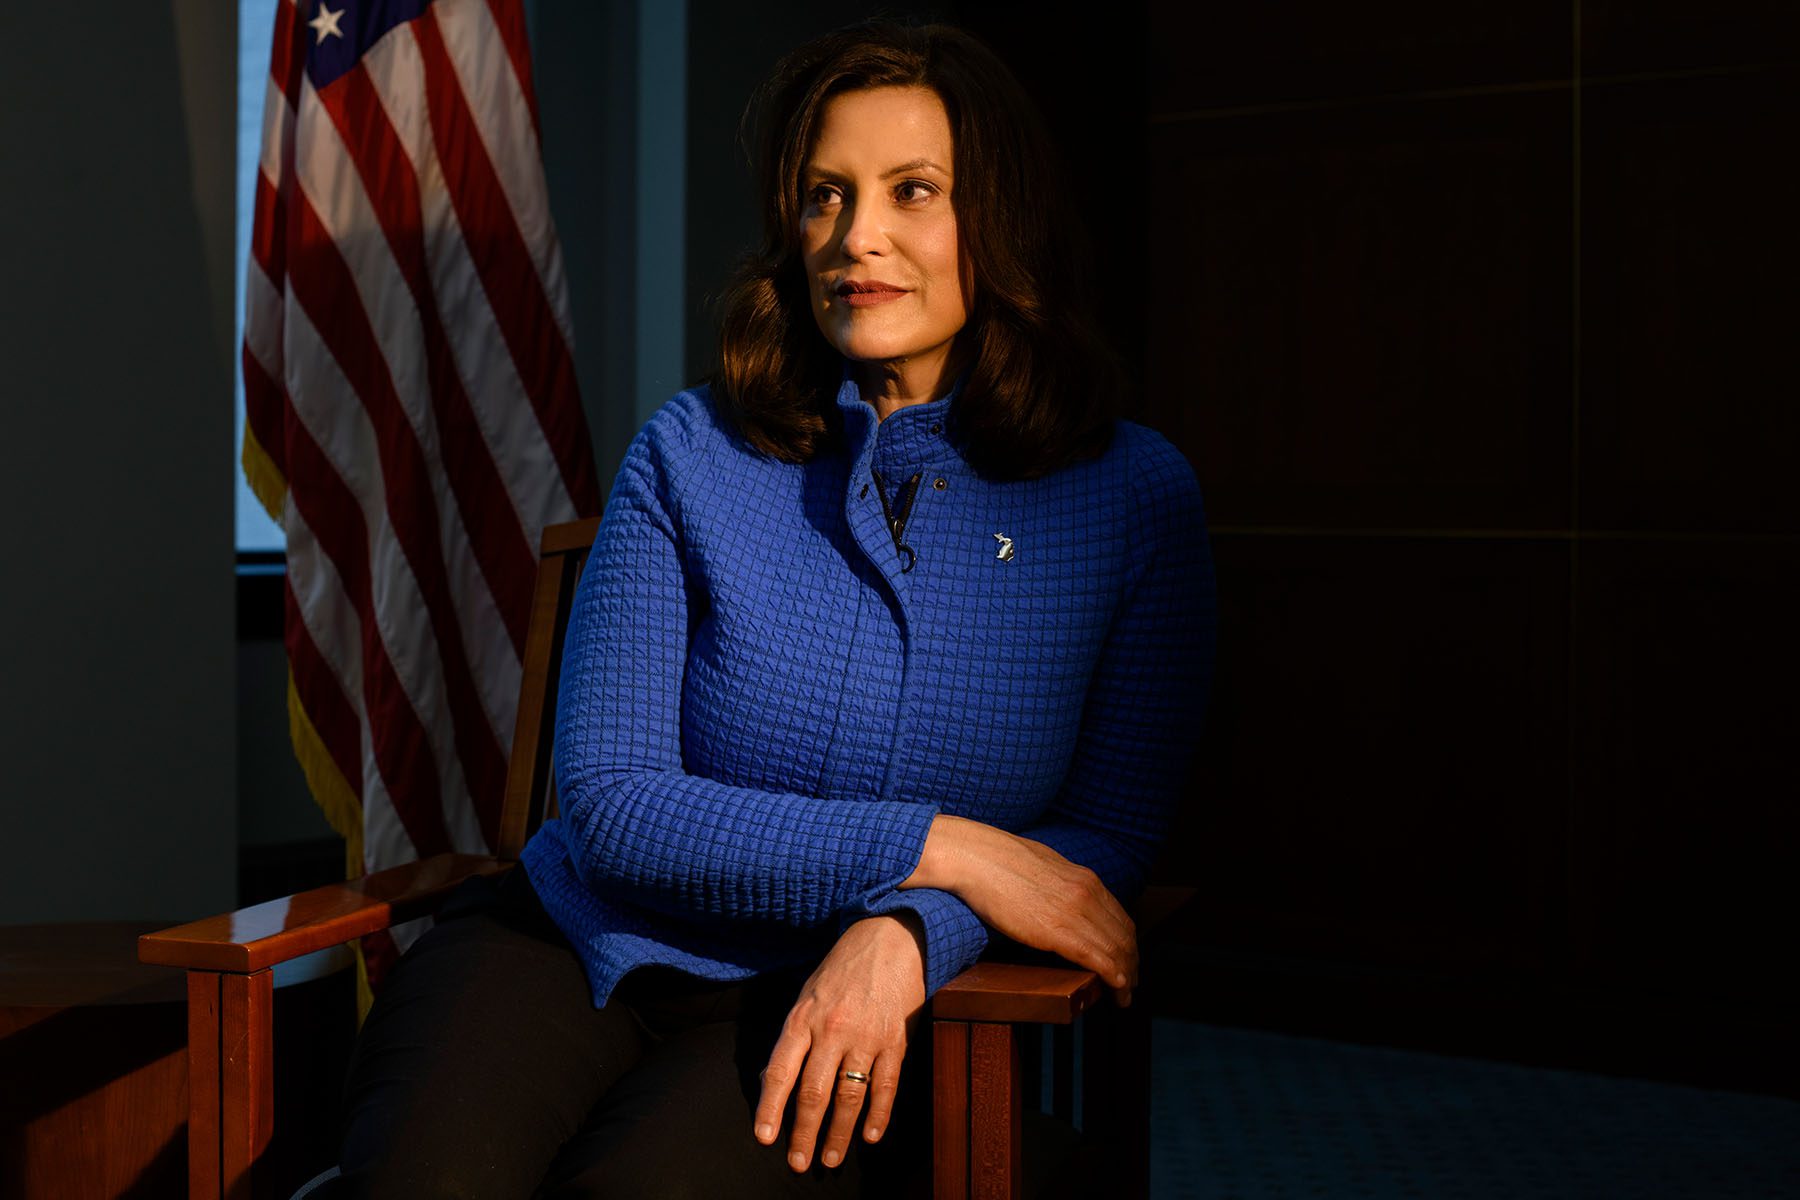 Gretchen Whitmer poses for a portrait near an American flag in the building where her office is located, in Lansing, Michigan in 2020.